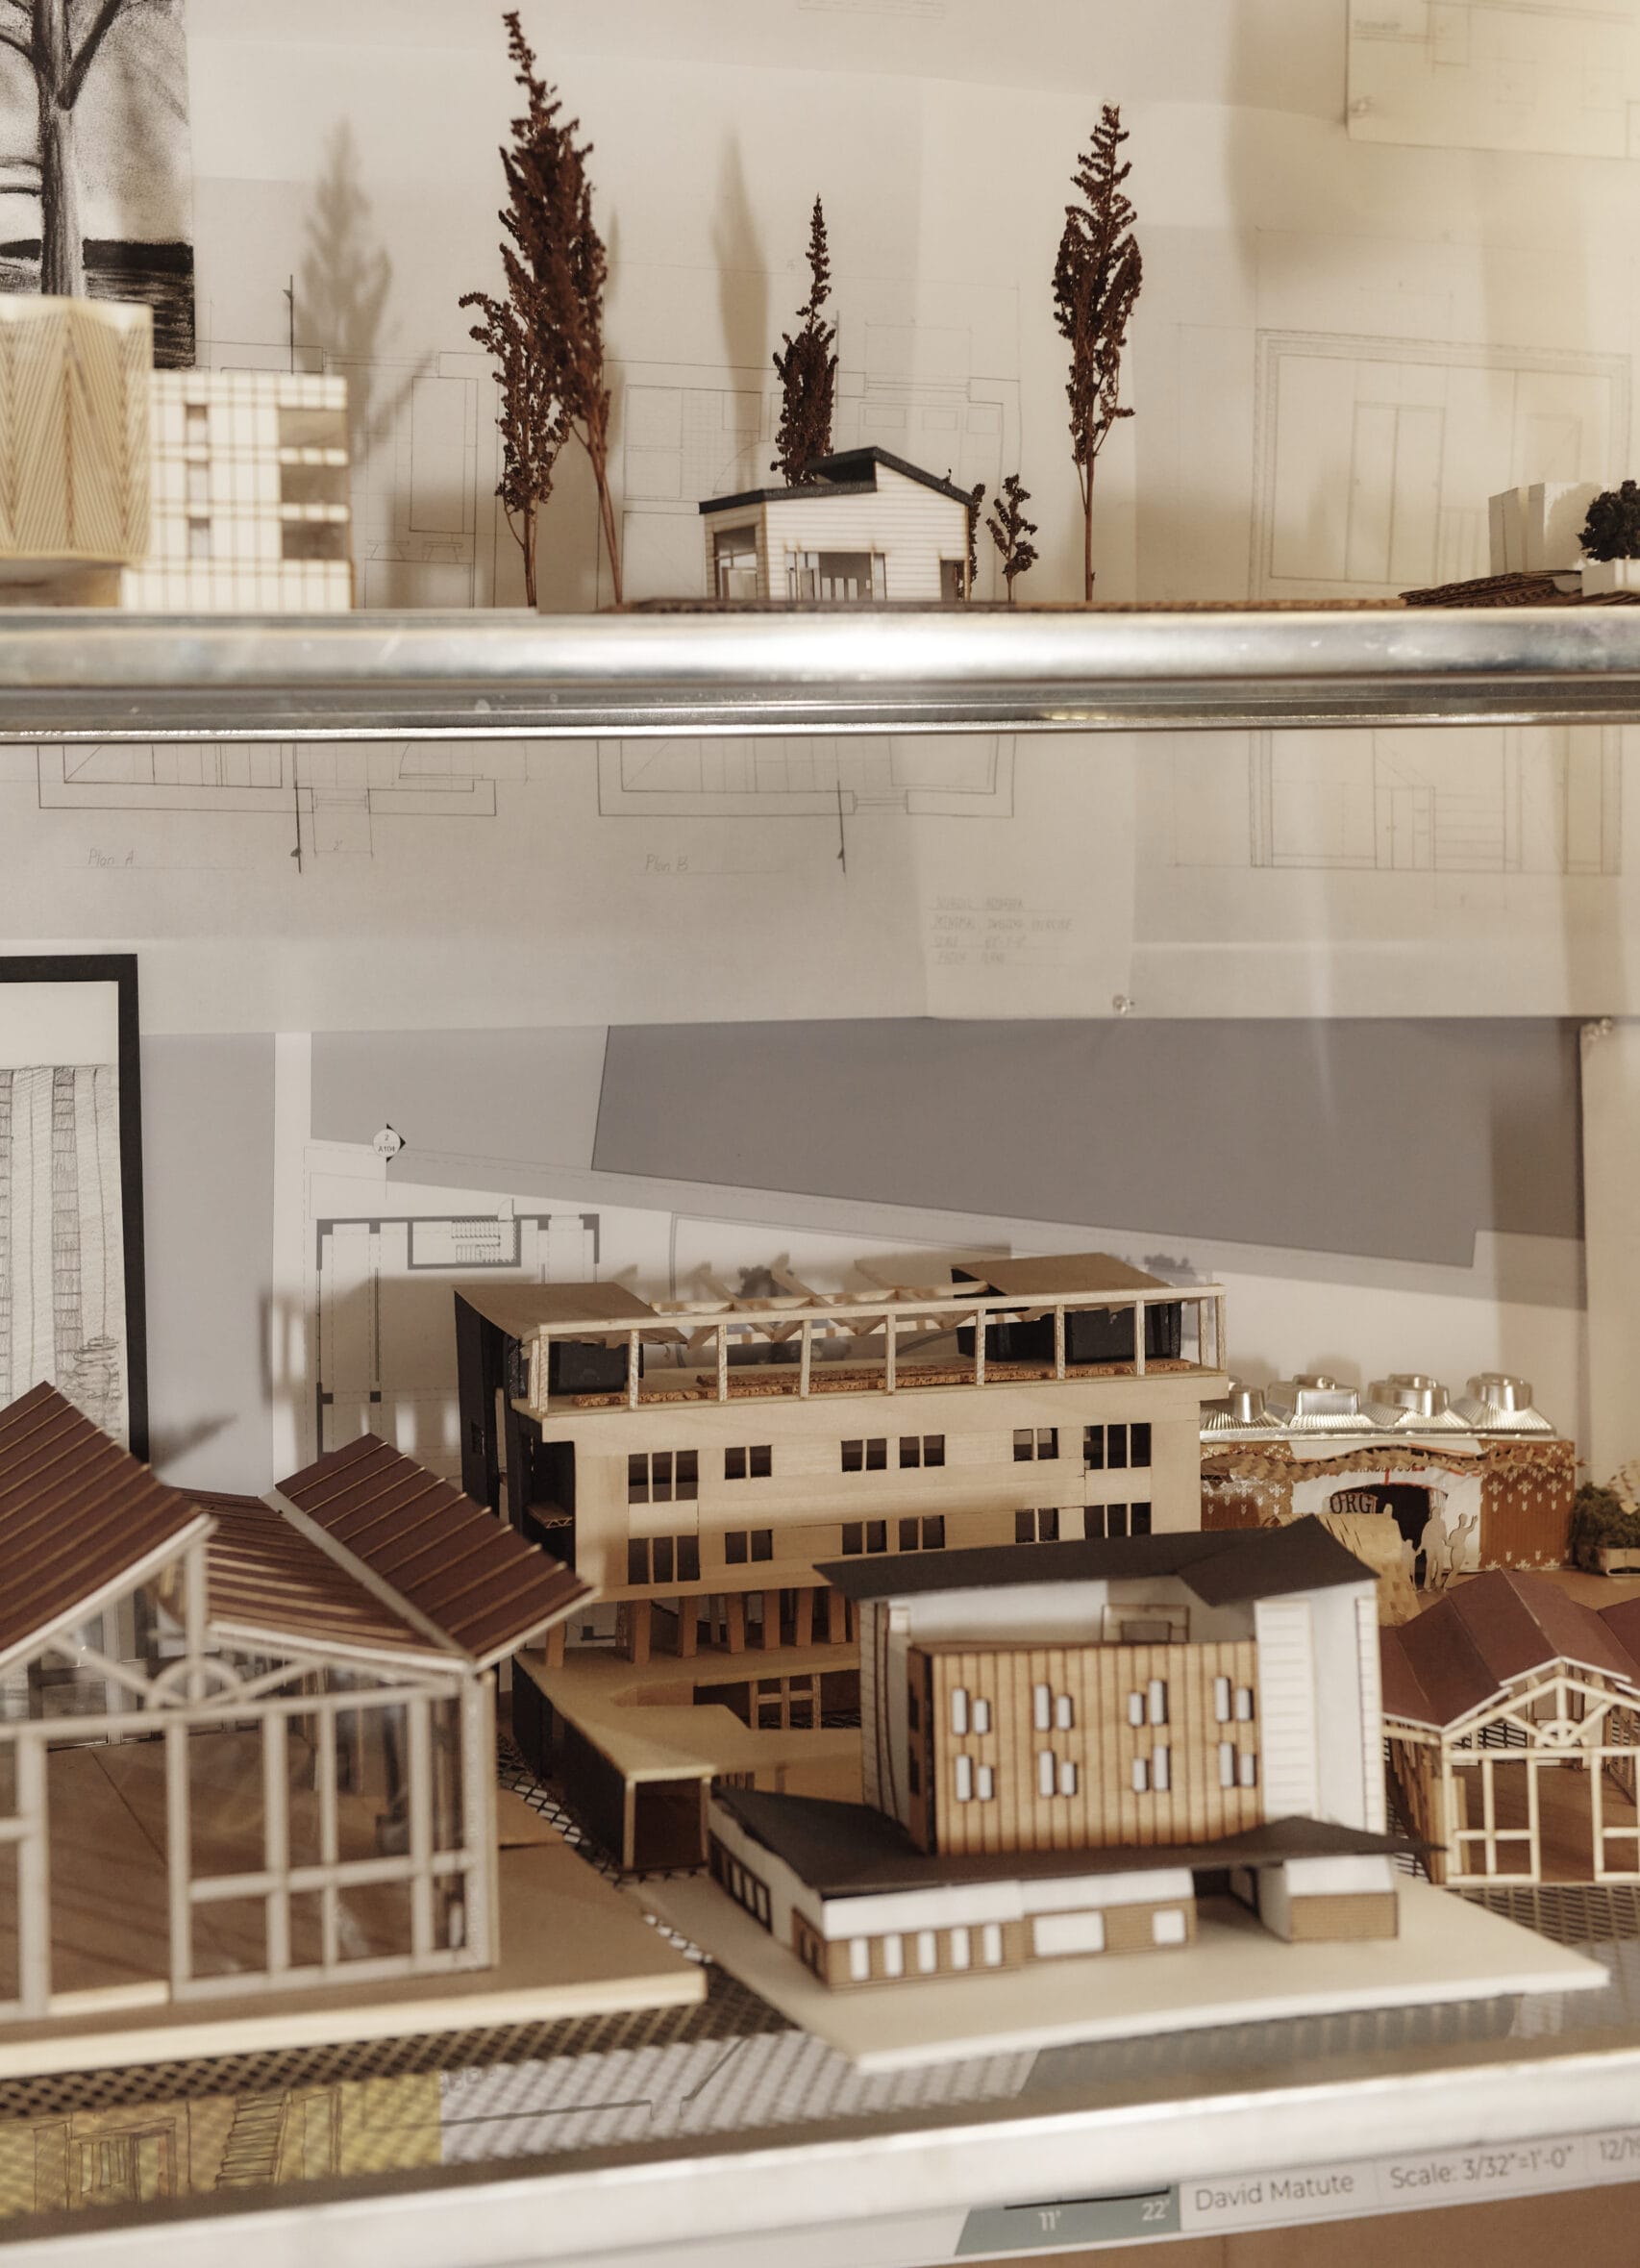 Lots of Architectural models made of wood lined up on shelves.